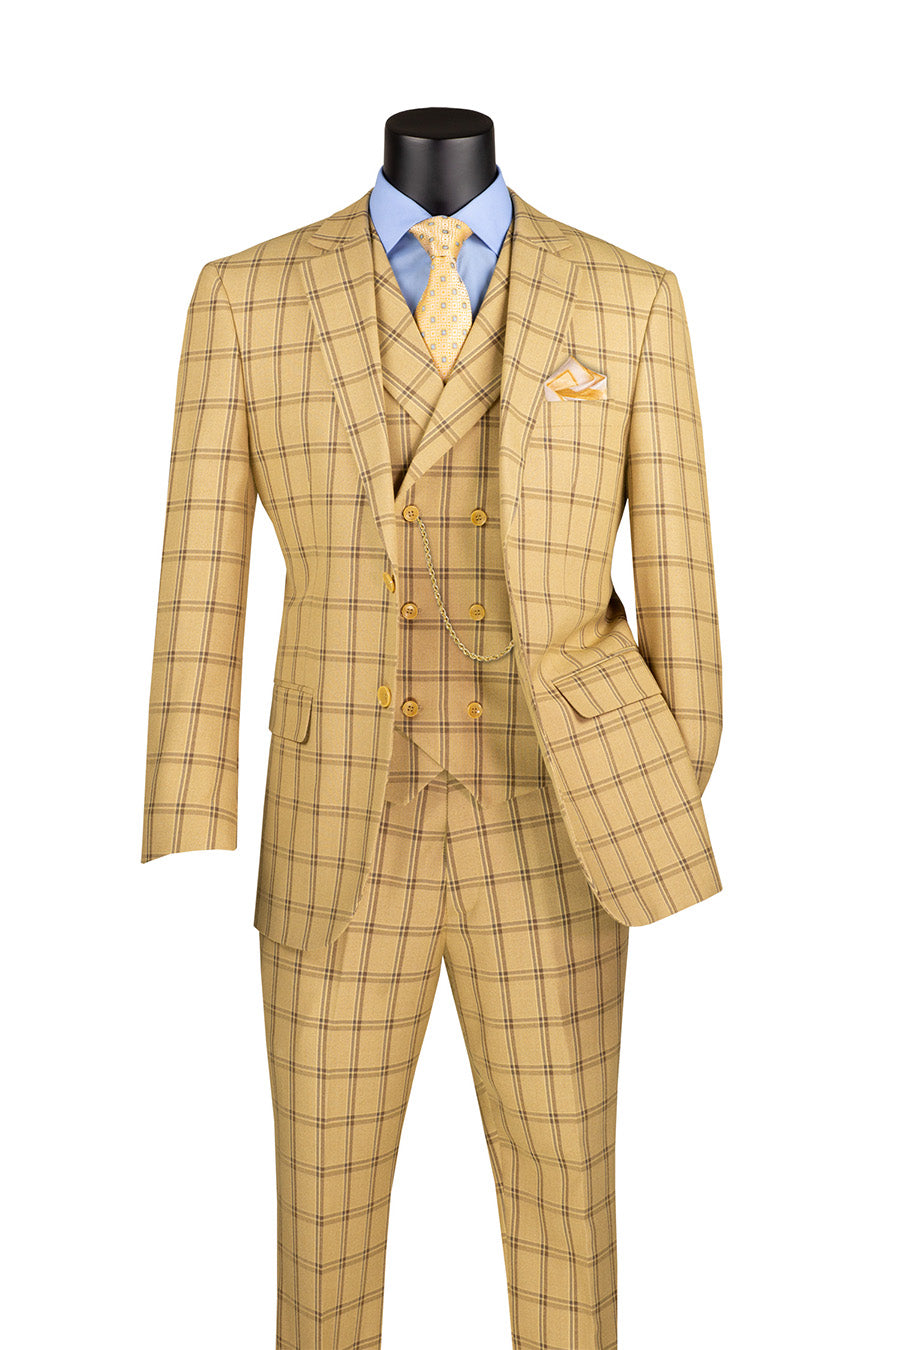 Lazio Collection - Modern Fit Windowpane Suit 3 Piece in Tan